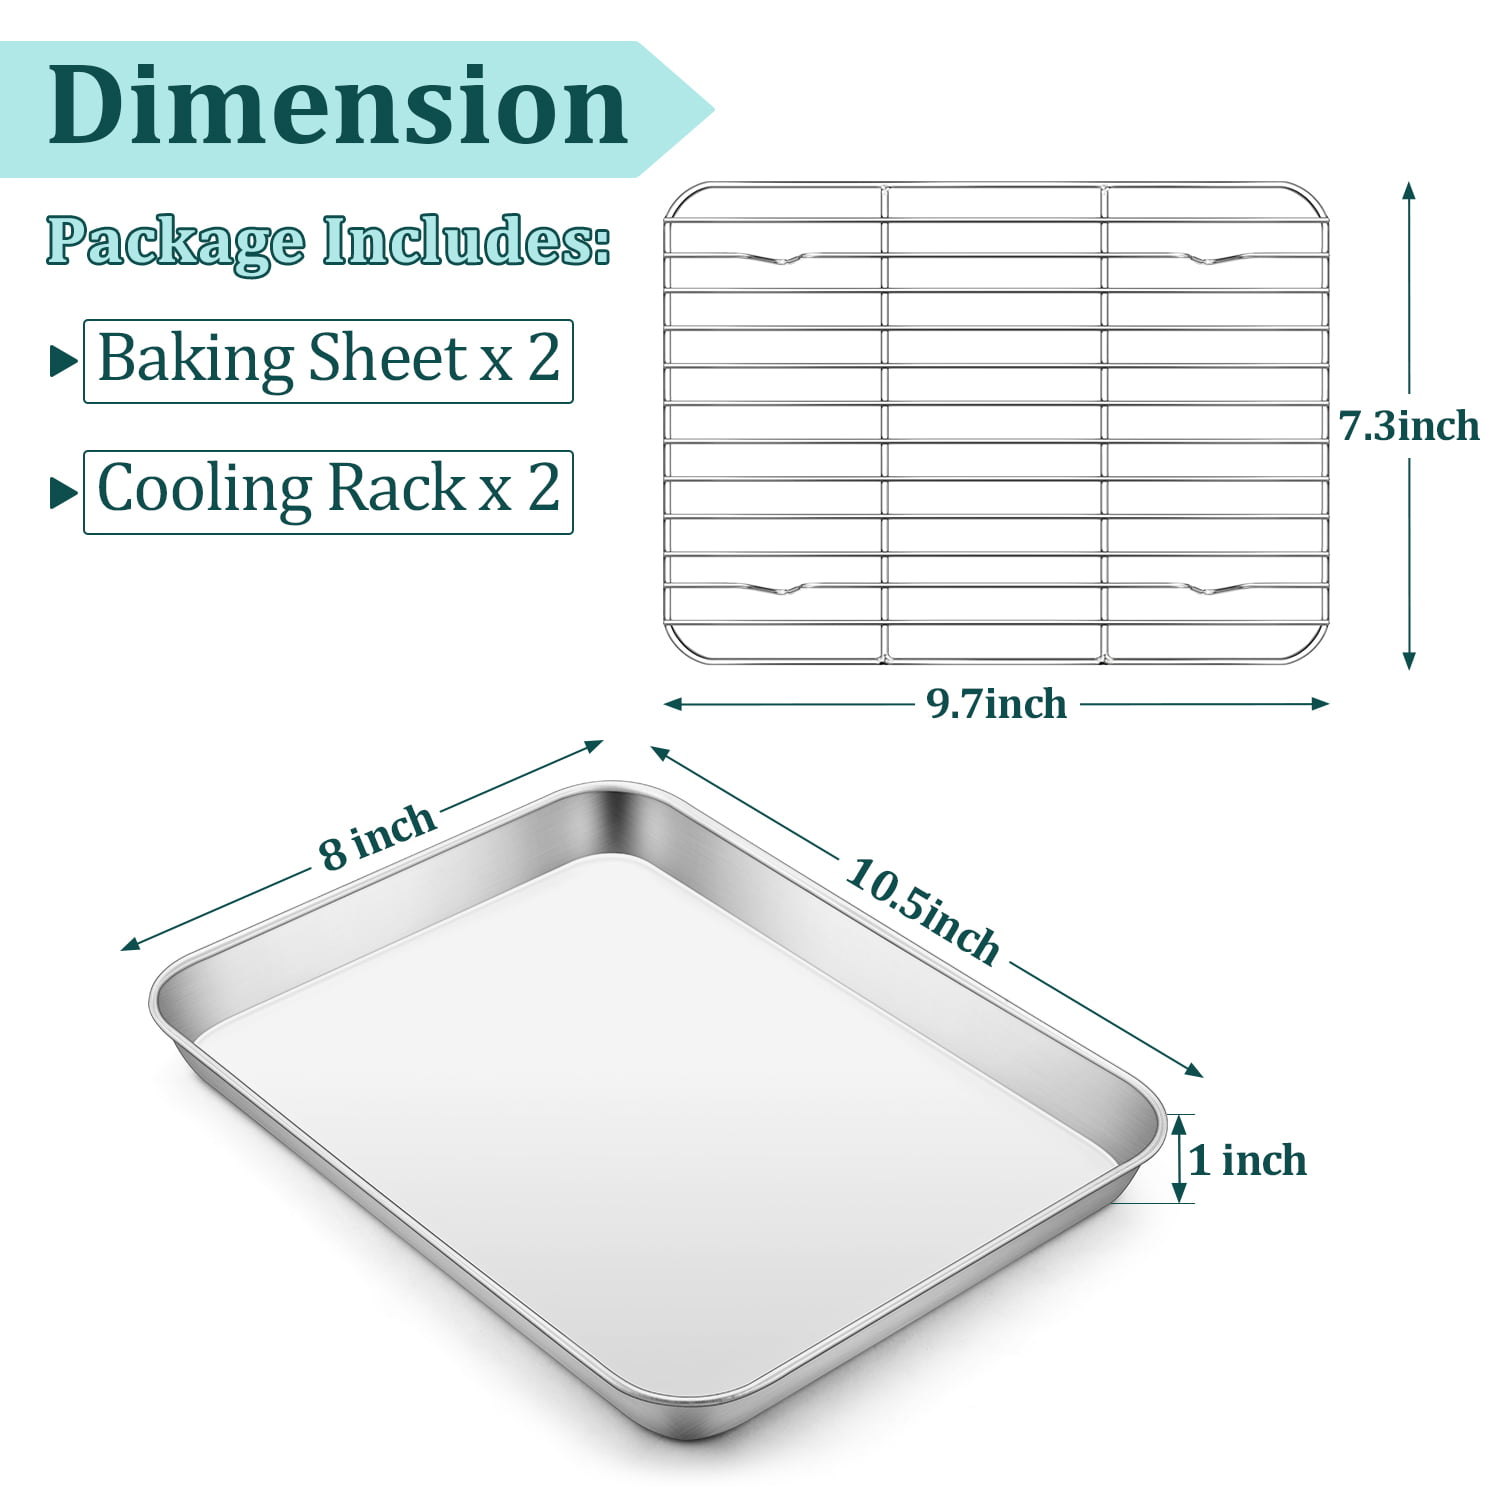 Walchoice Stainless Steel Baking Sheets, Professional Cookie Sheet